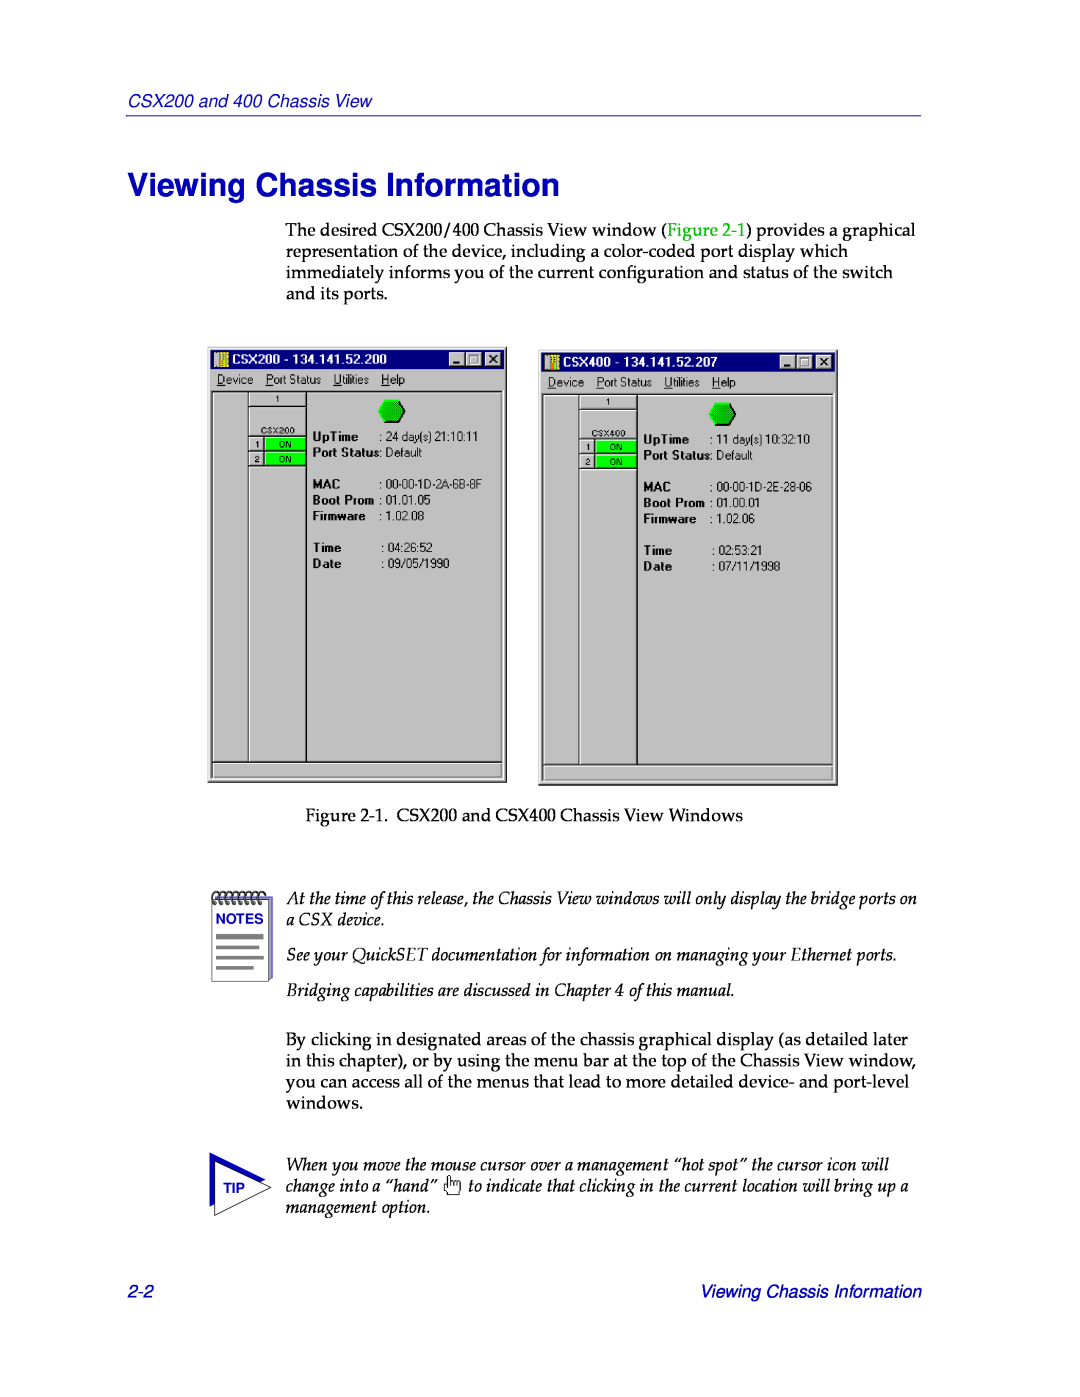 Cabletron Systems CSX400 manual Viewing Chassis Information, CSX200 and 400 Chassis View 